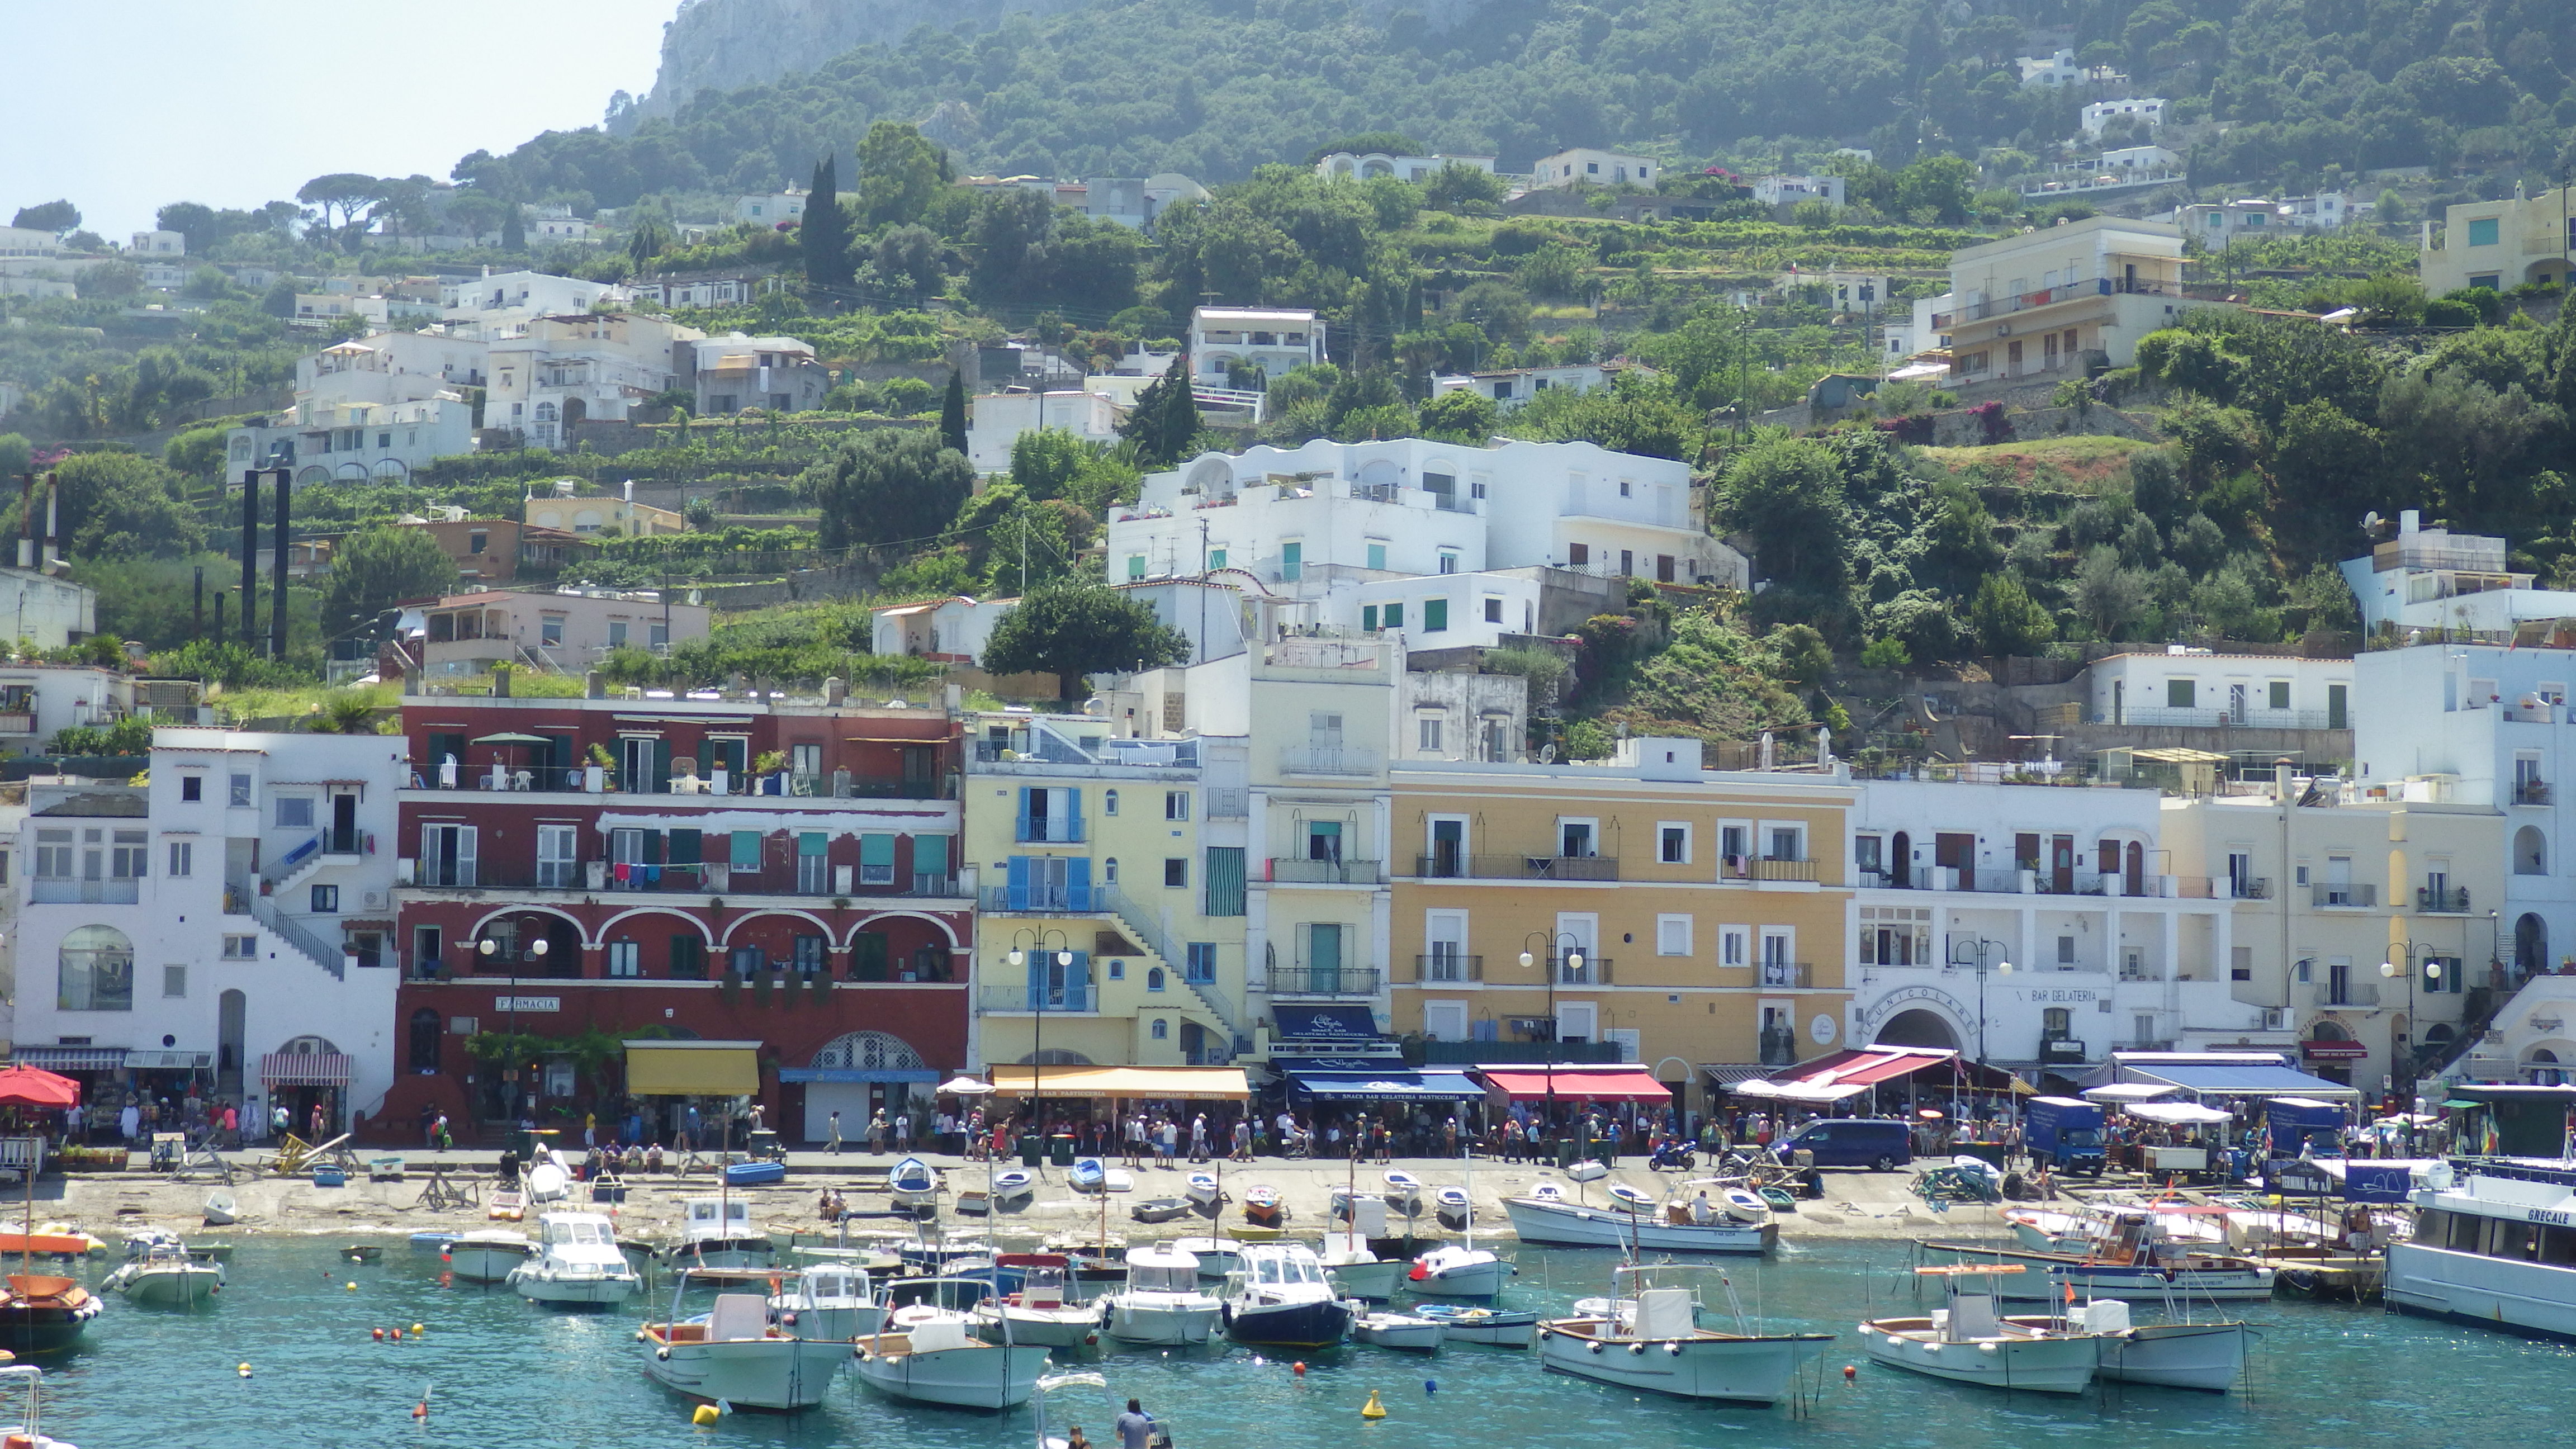 A Day Trip to Capri from Rome